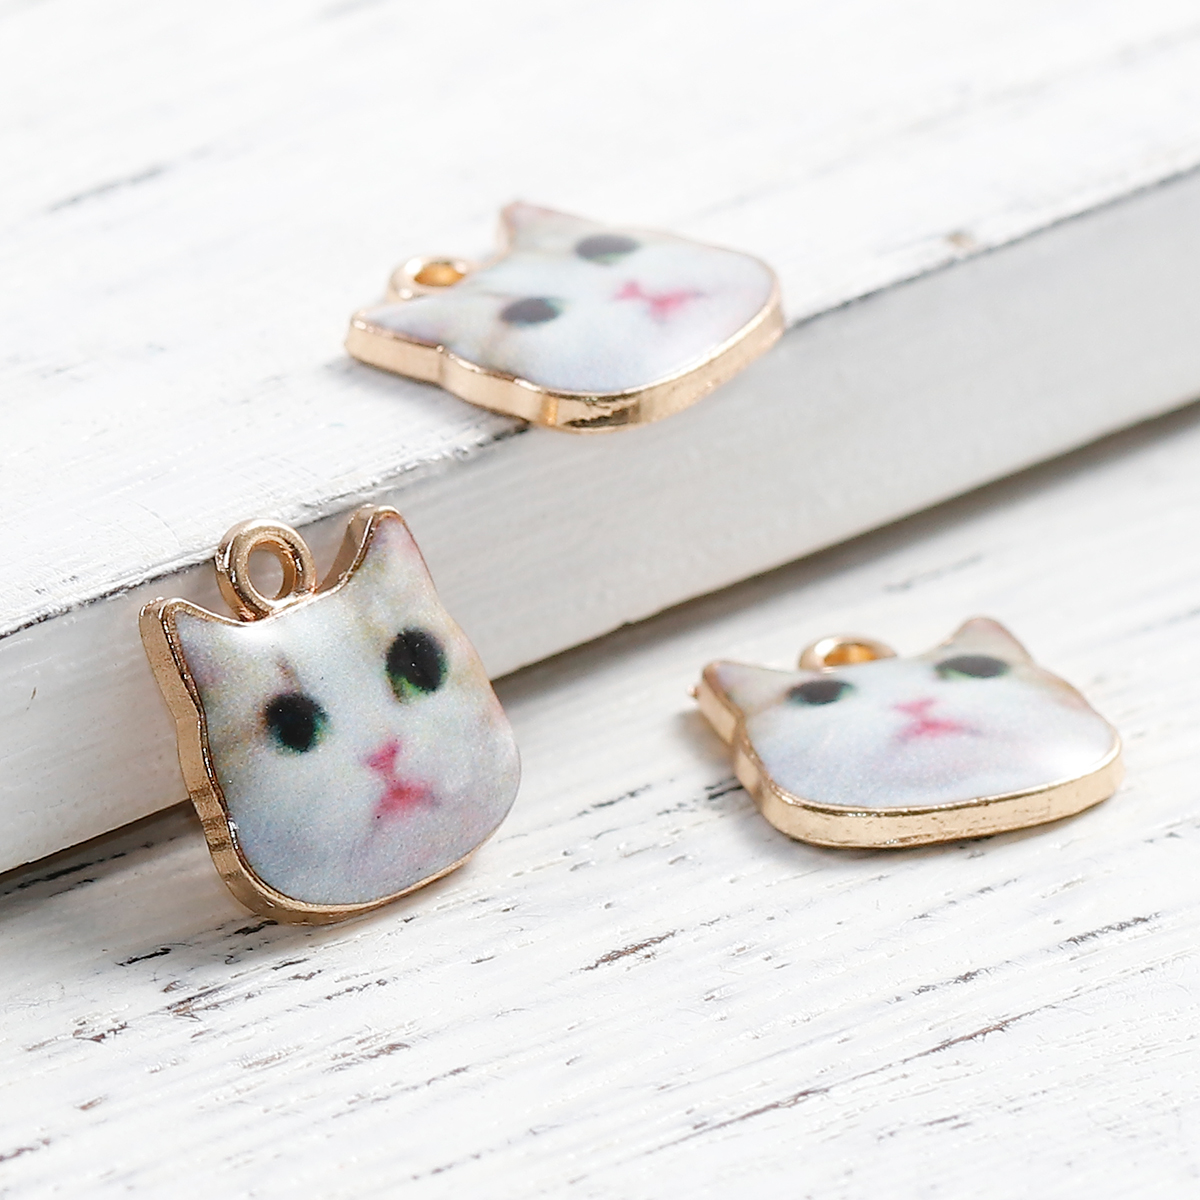 Picture of Zinc Based Alloy Charms Cat Animal Gold Plated Off-white Enamel 13mm( 4/8") x 13mm( 4/8"), 10 PCs